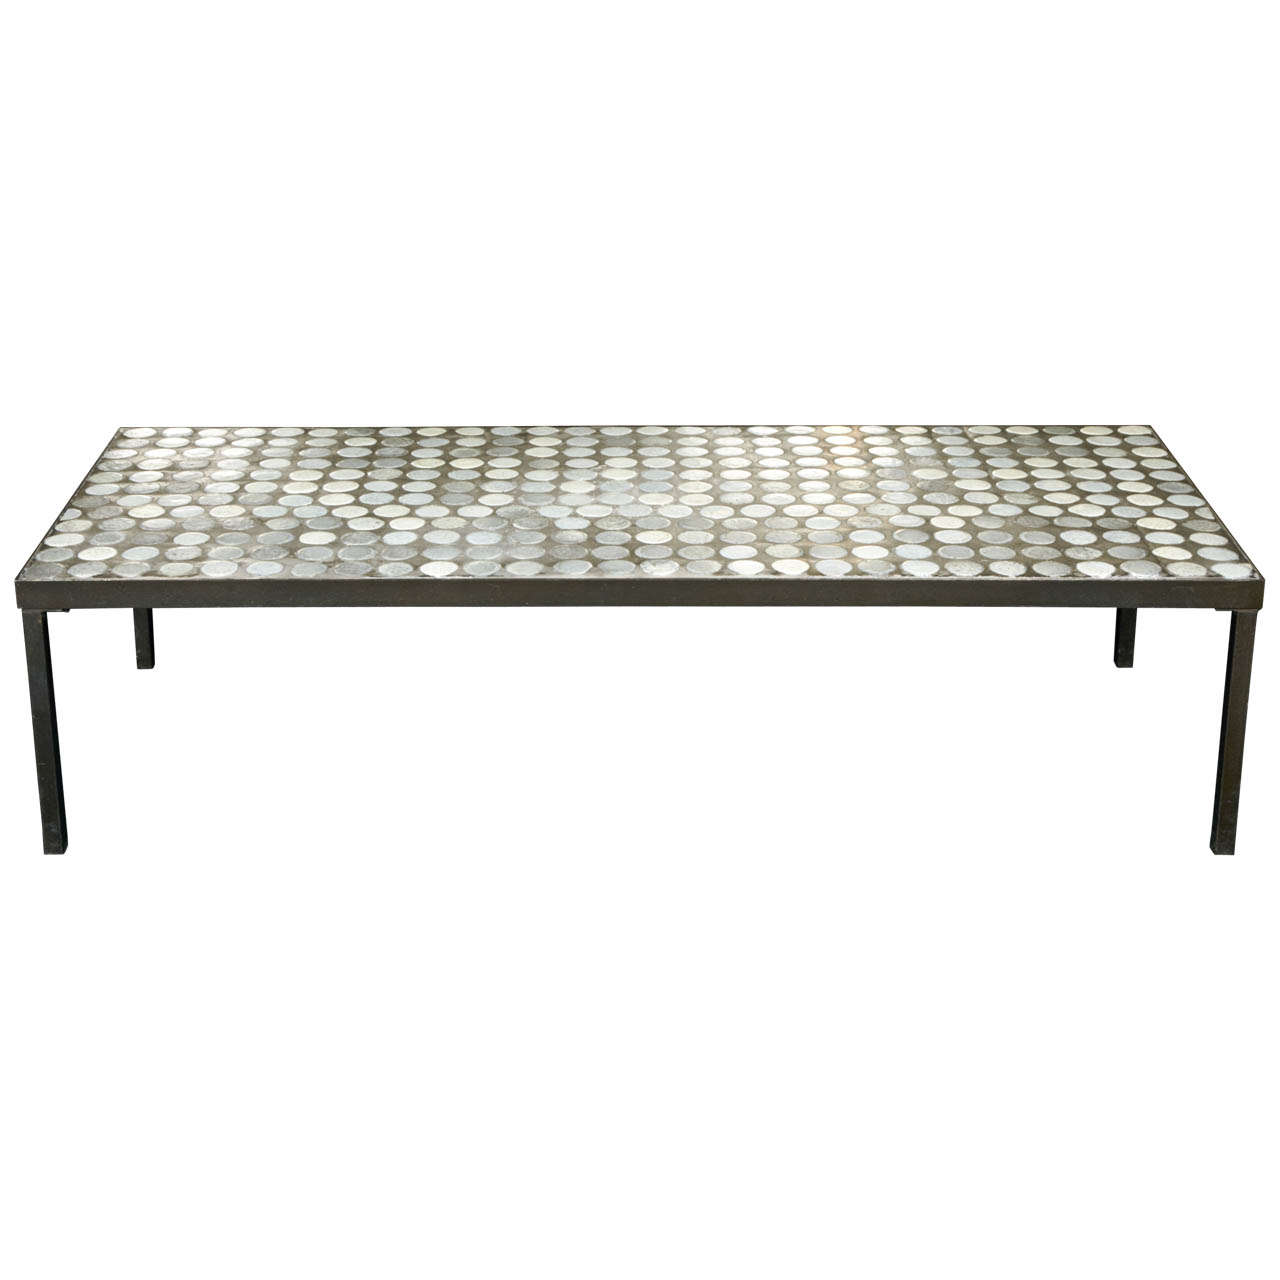 Very Rare 1960 Coffee Table by Roger Capron